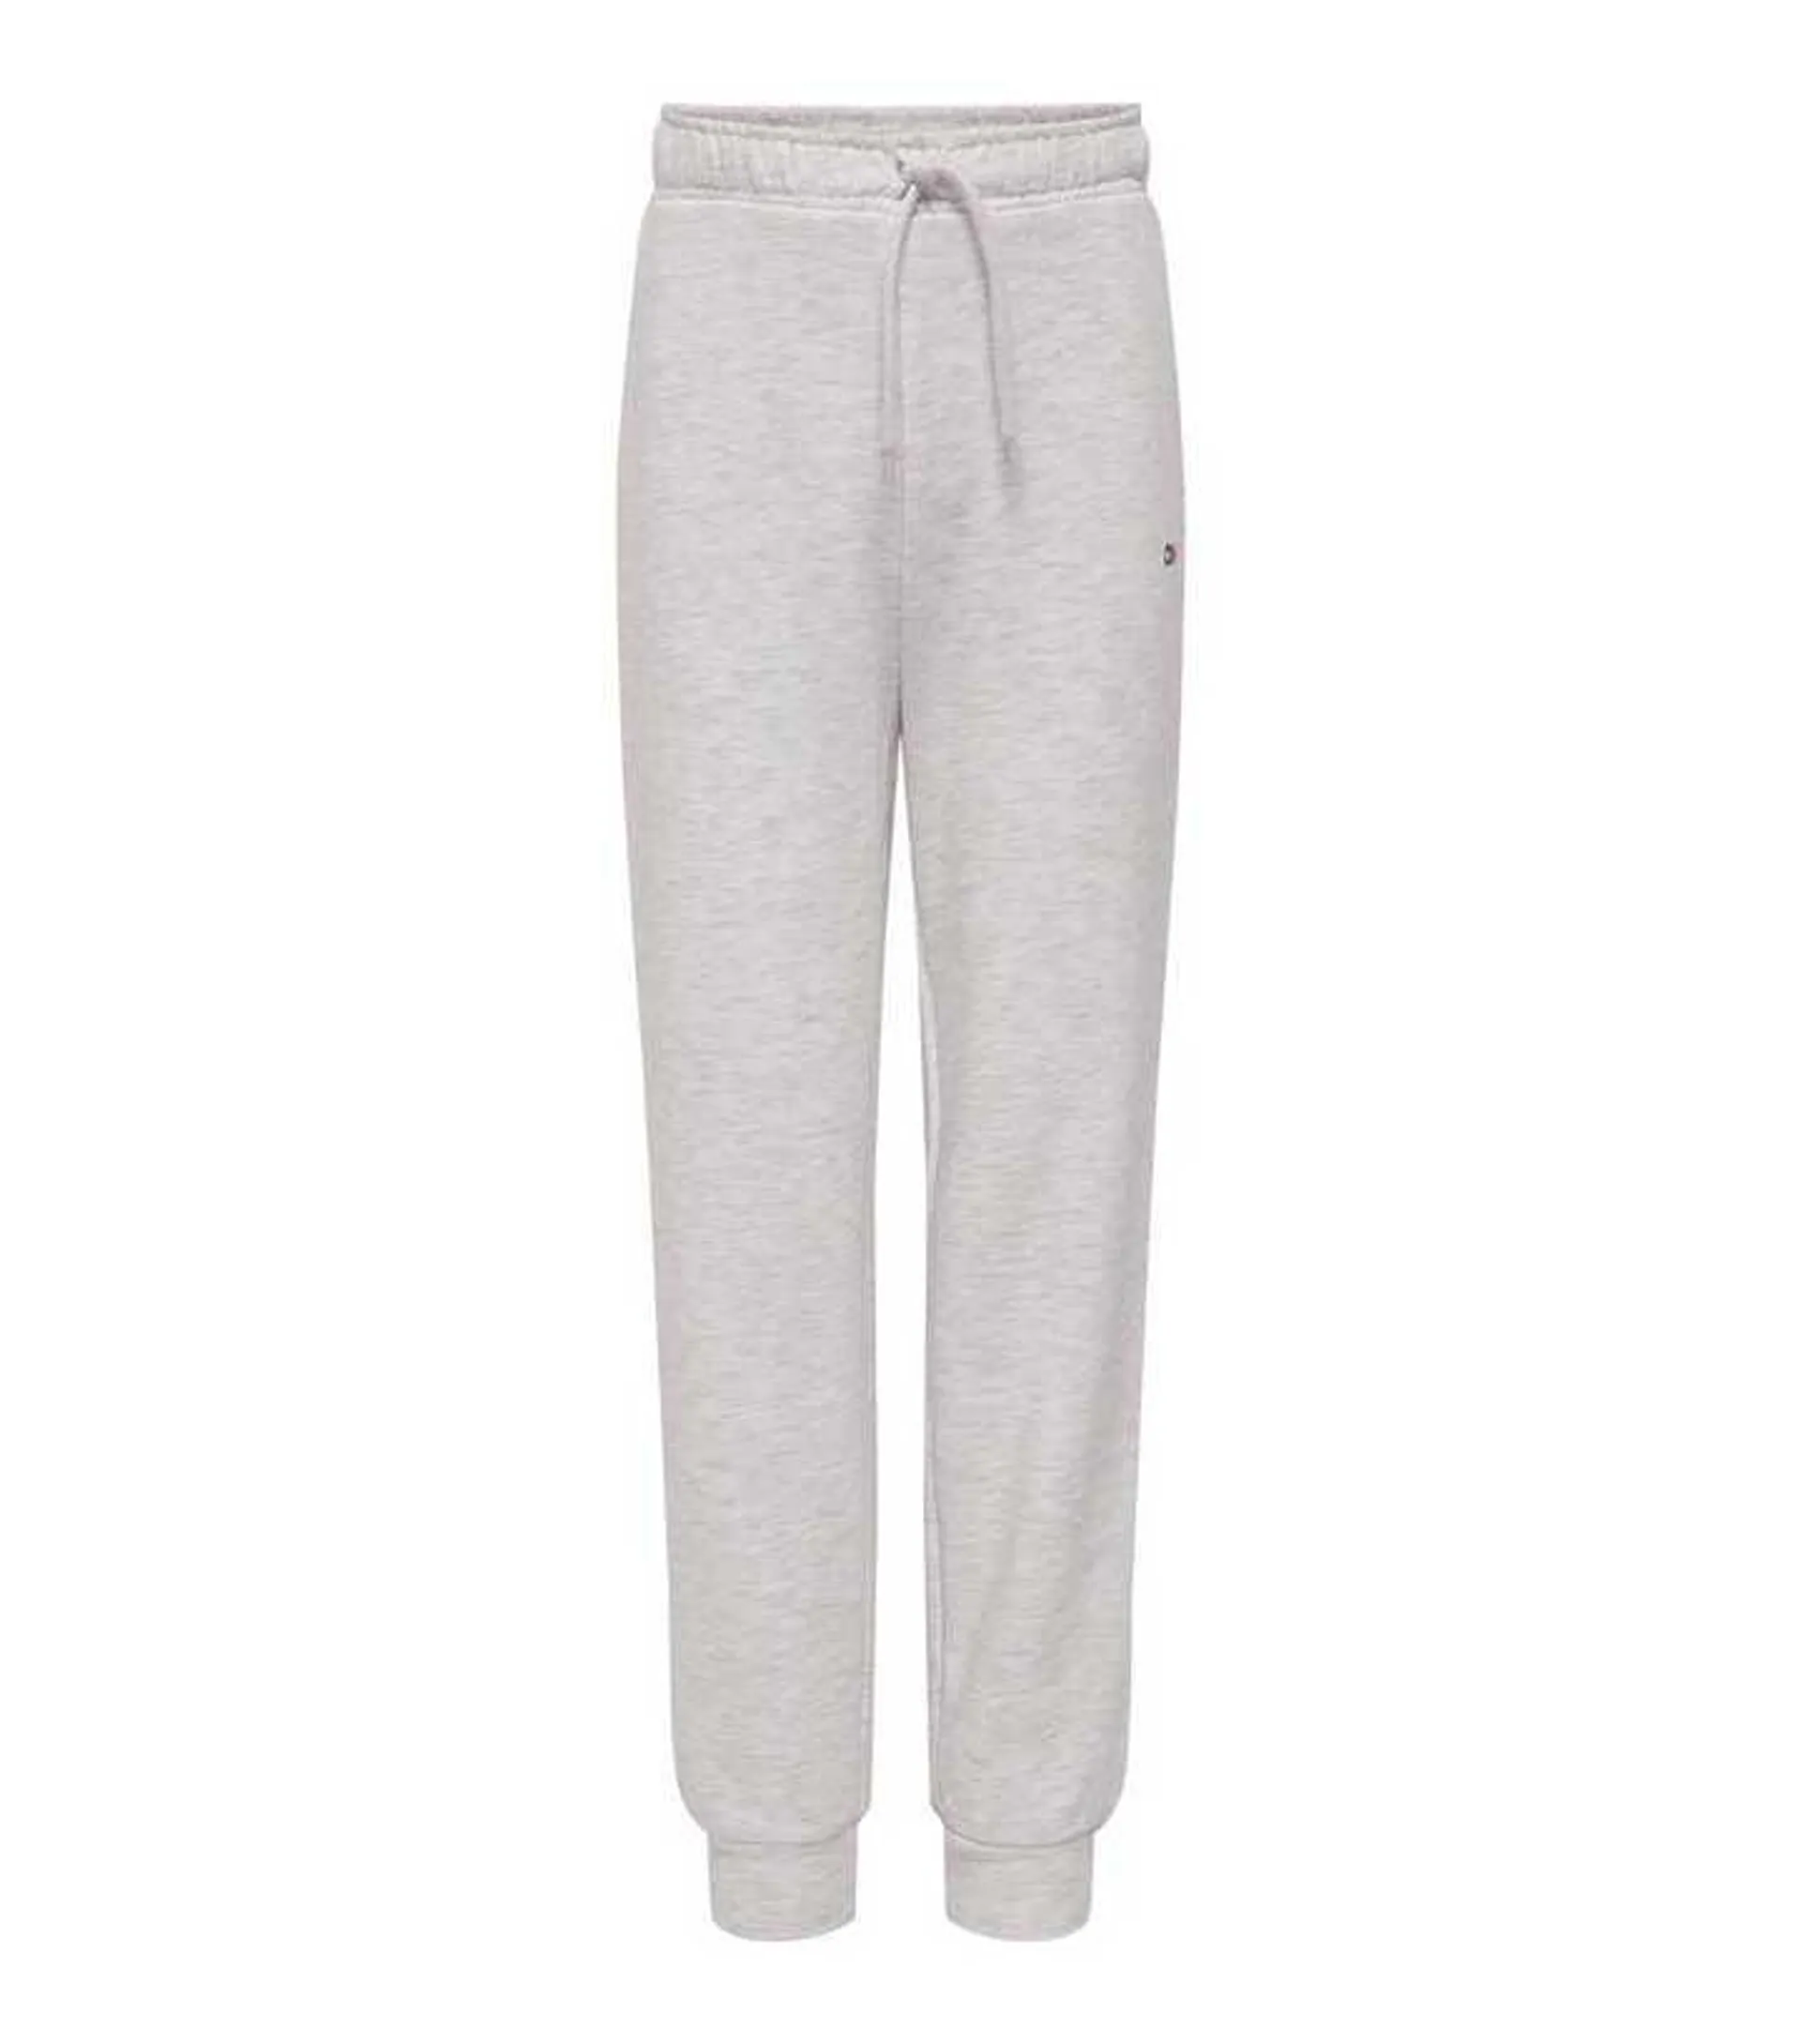 KIDS ONLY Pale Grey Cuffed Logo Joggers